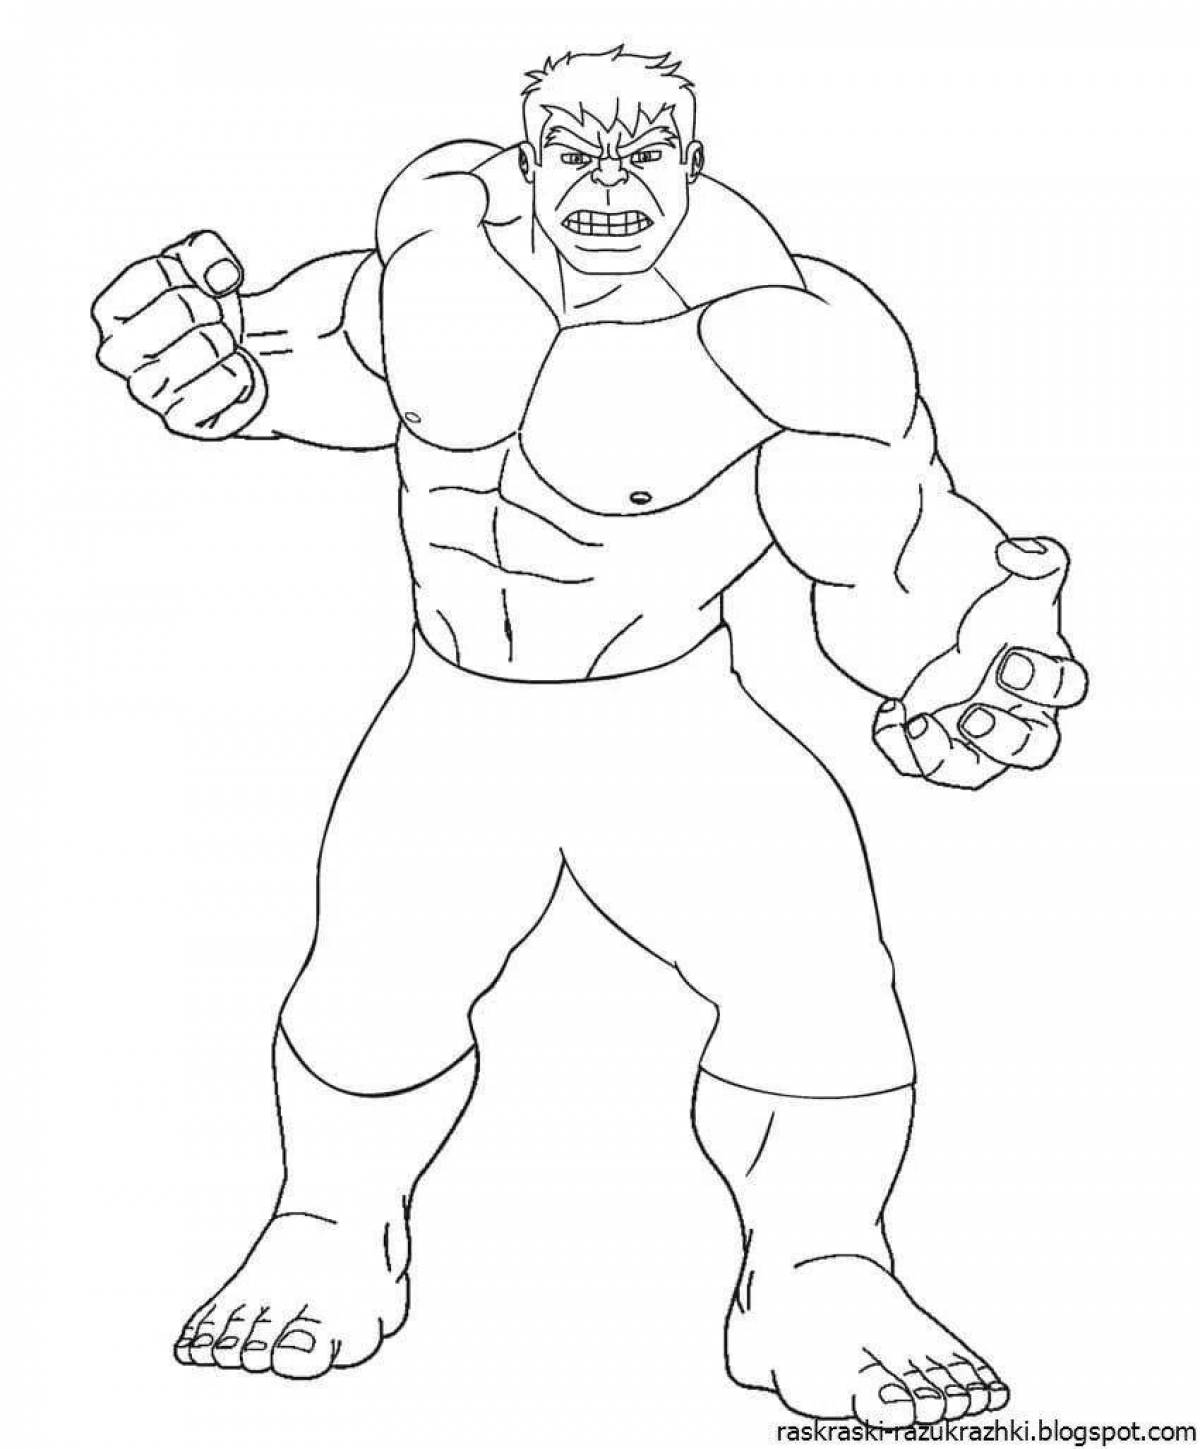 Hulk coloring book for kids 5-6 years old